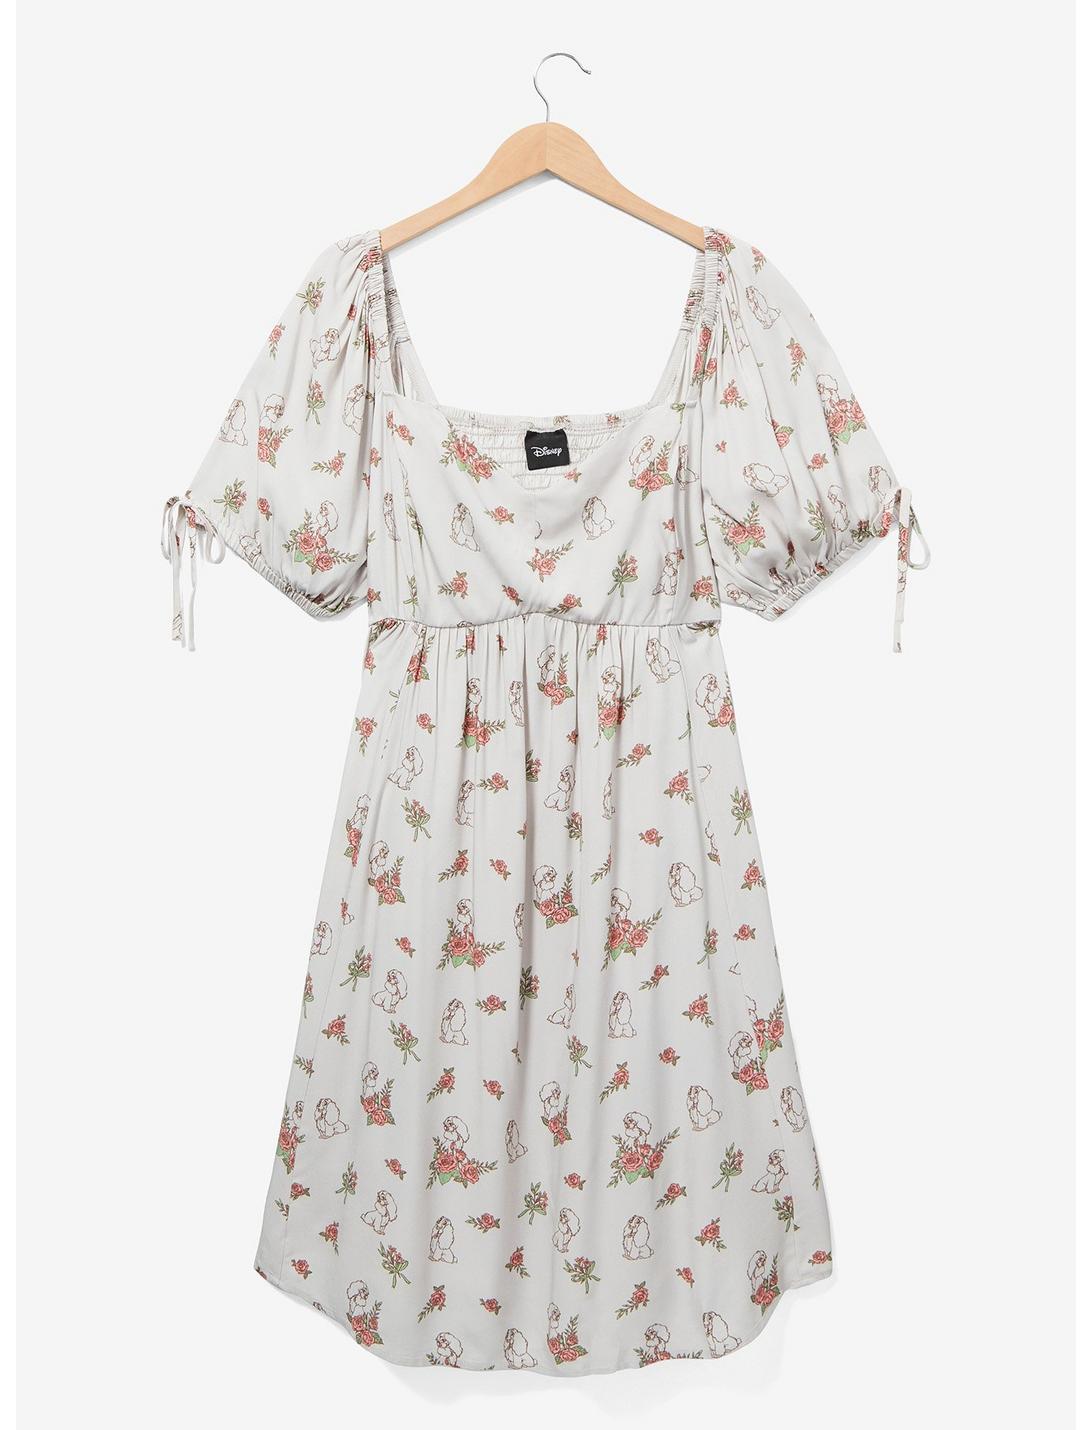 Disney Lady and the Tramp Floral Lady Allover Print Plus Size Dress - BoxLunch Exclusive, OFF WHITE, hi-res